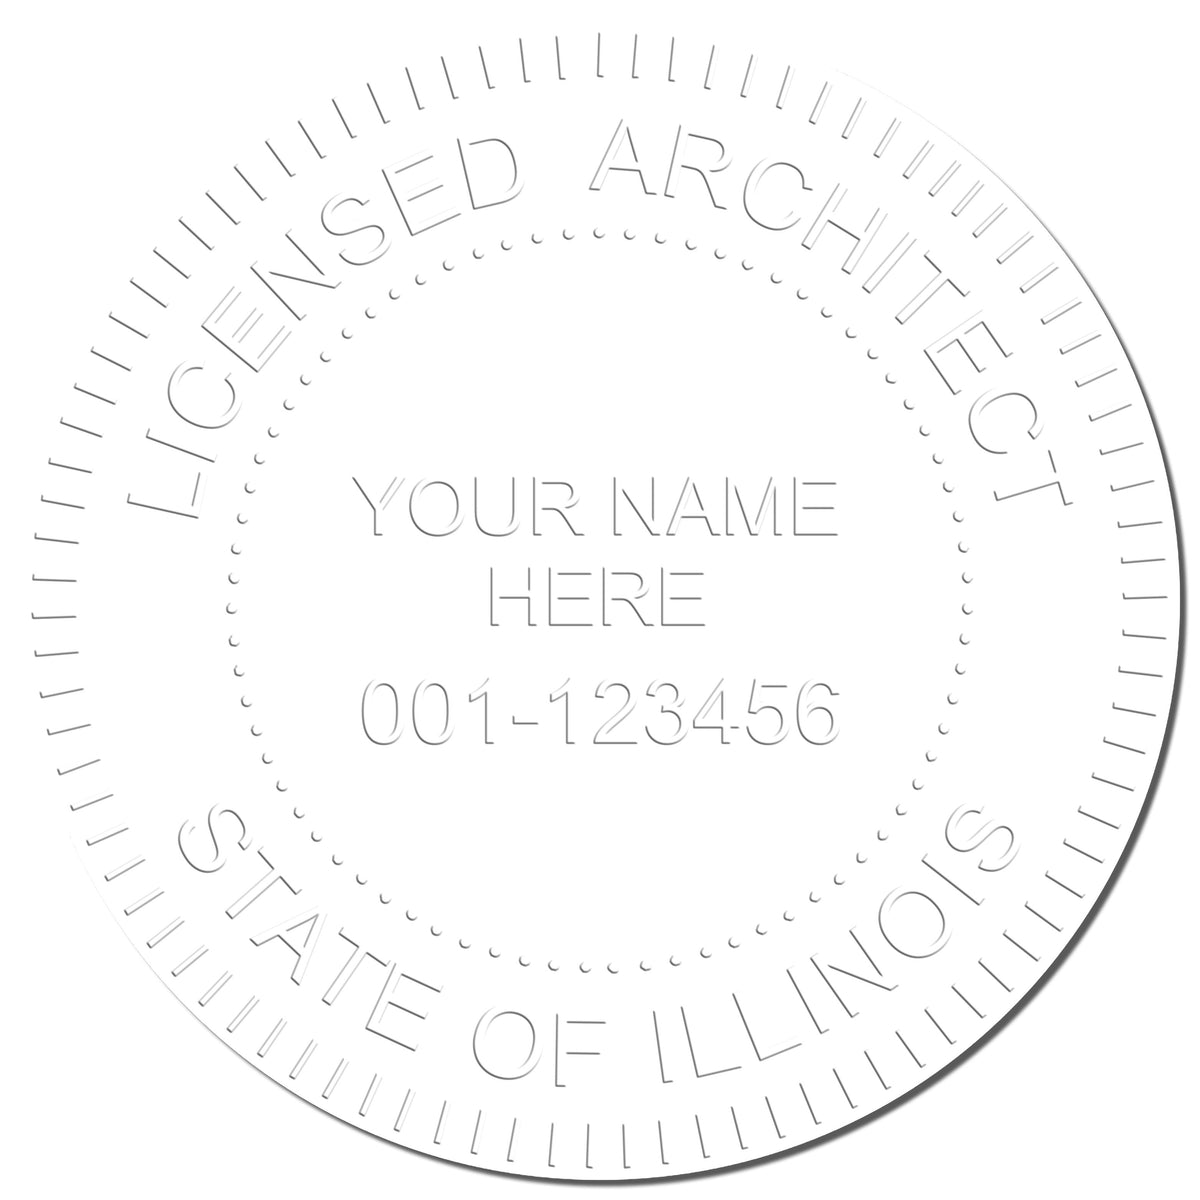 A photograph of the Handheld Illinois Architect Seal Embosser stamp impression reveals a vivid, professional image of the on paper.